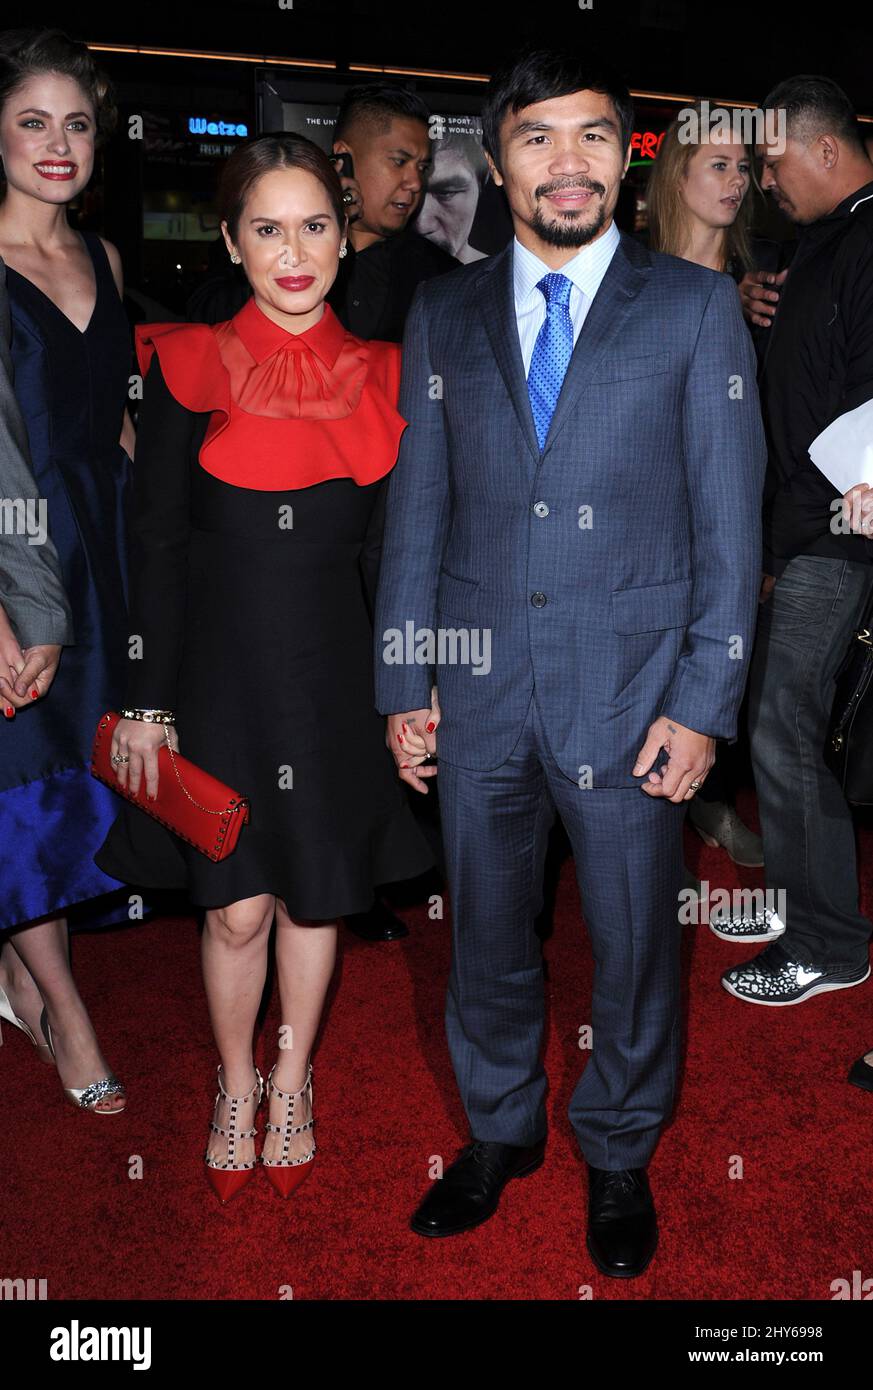 Manny Pacquiao, Jinkee Pacquiao arriving for the Manny premiere held at TCL Chinese Theater, Los Angeles. Stock Photo